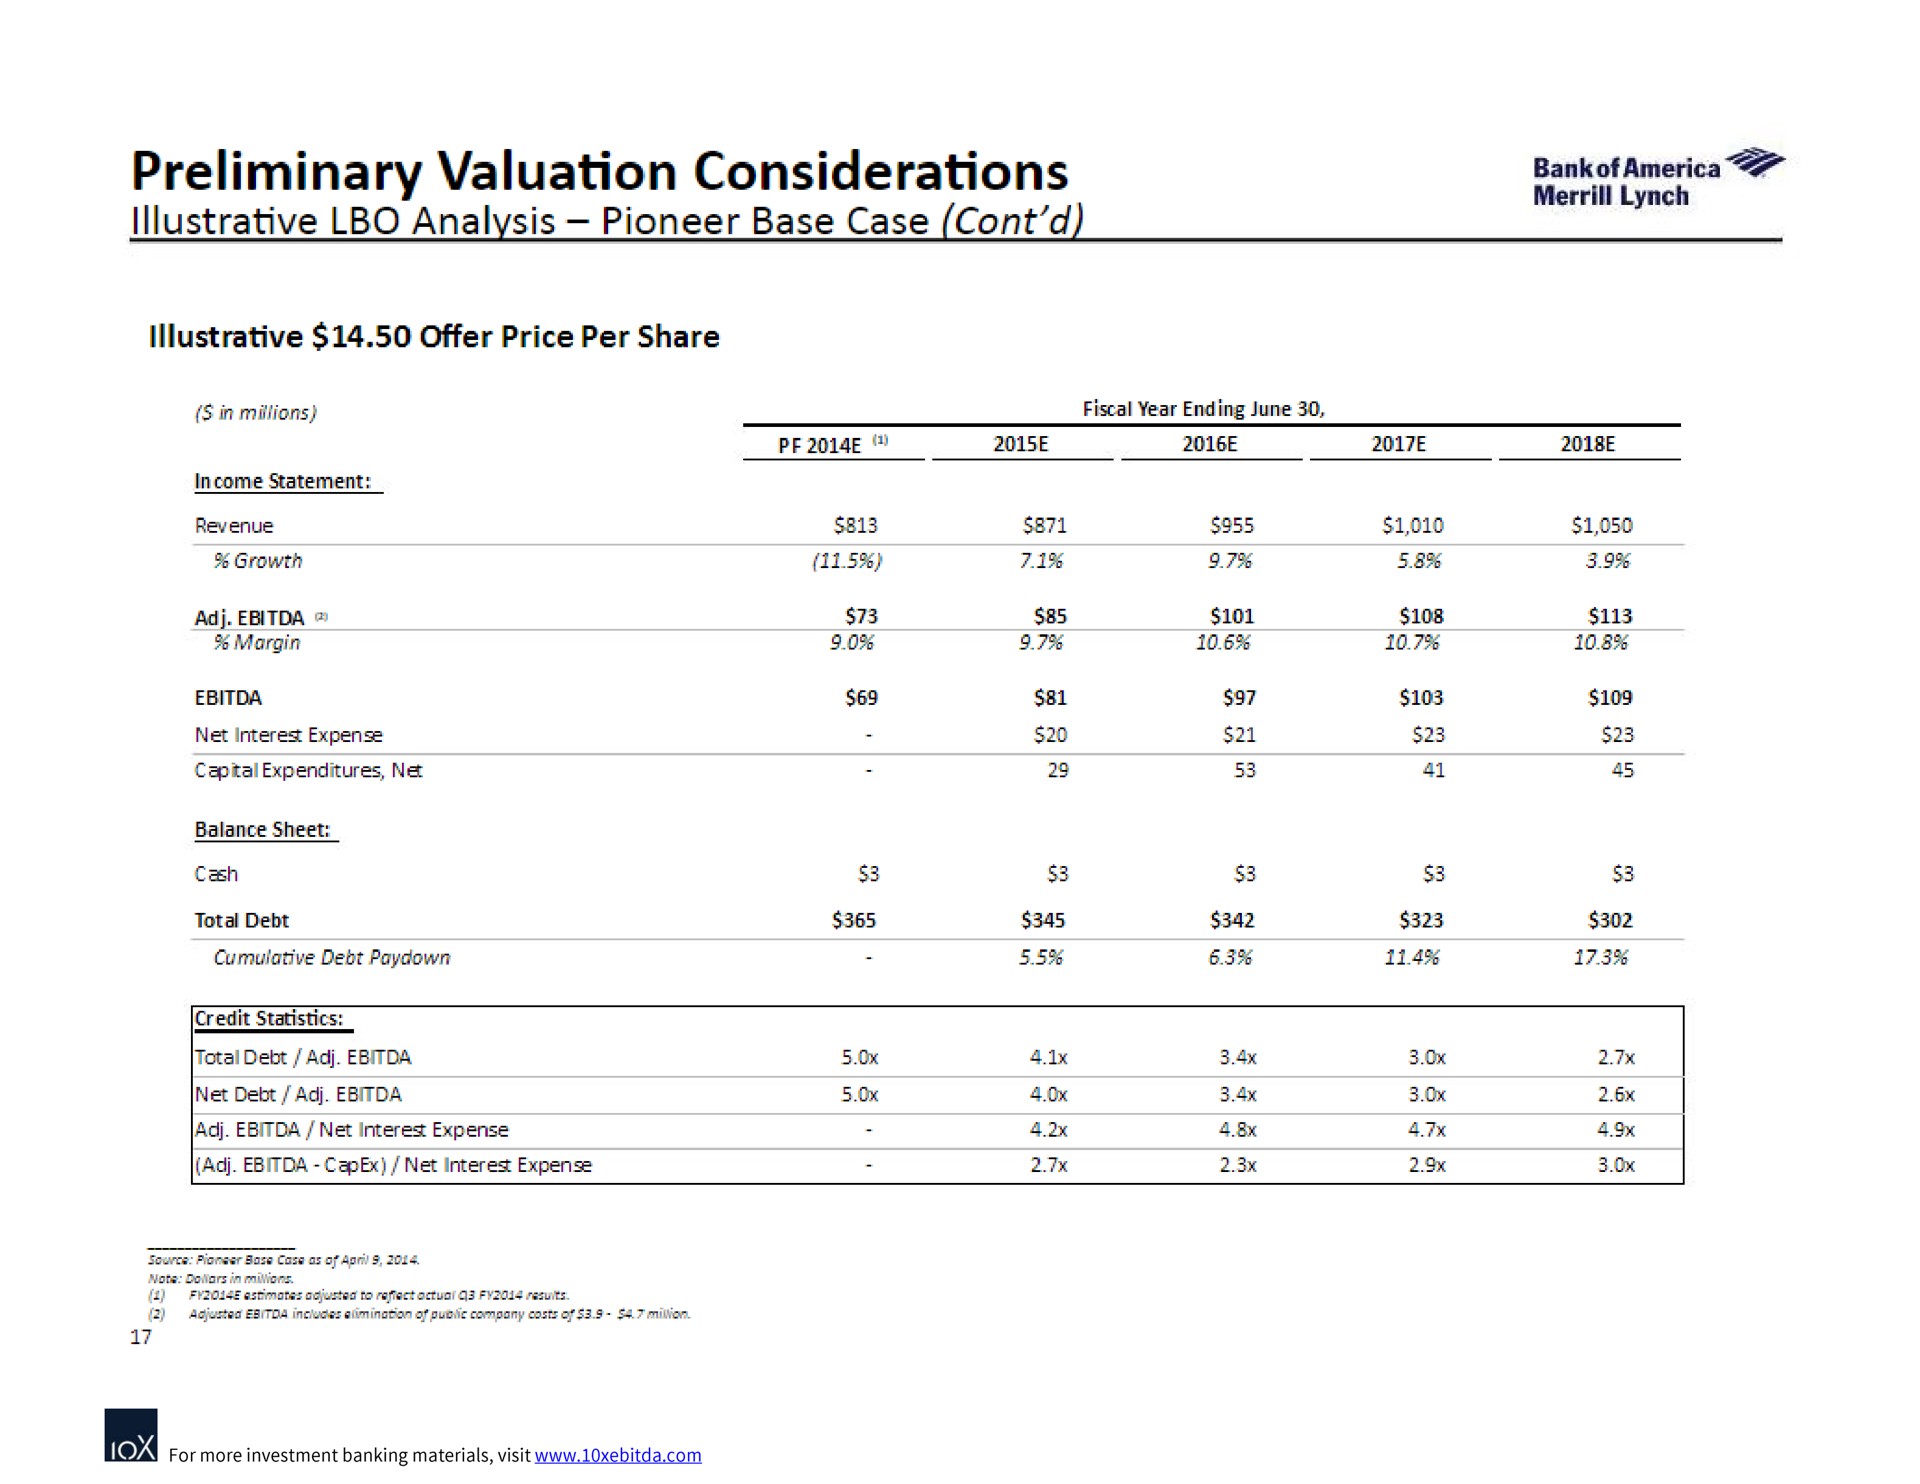 preliminary valuation considerations | Bank of America